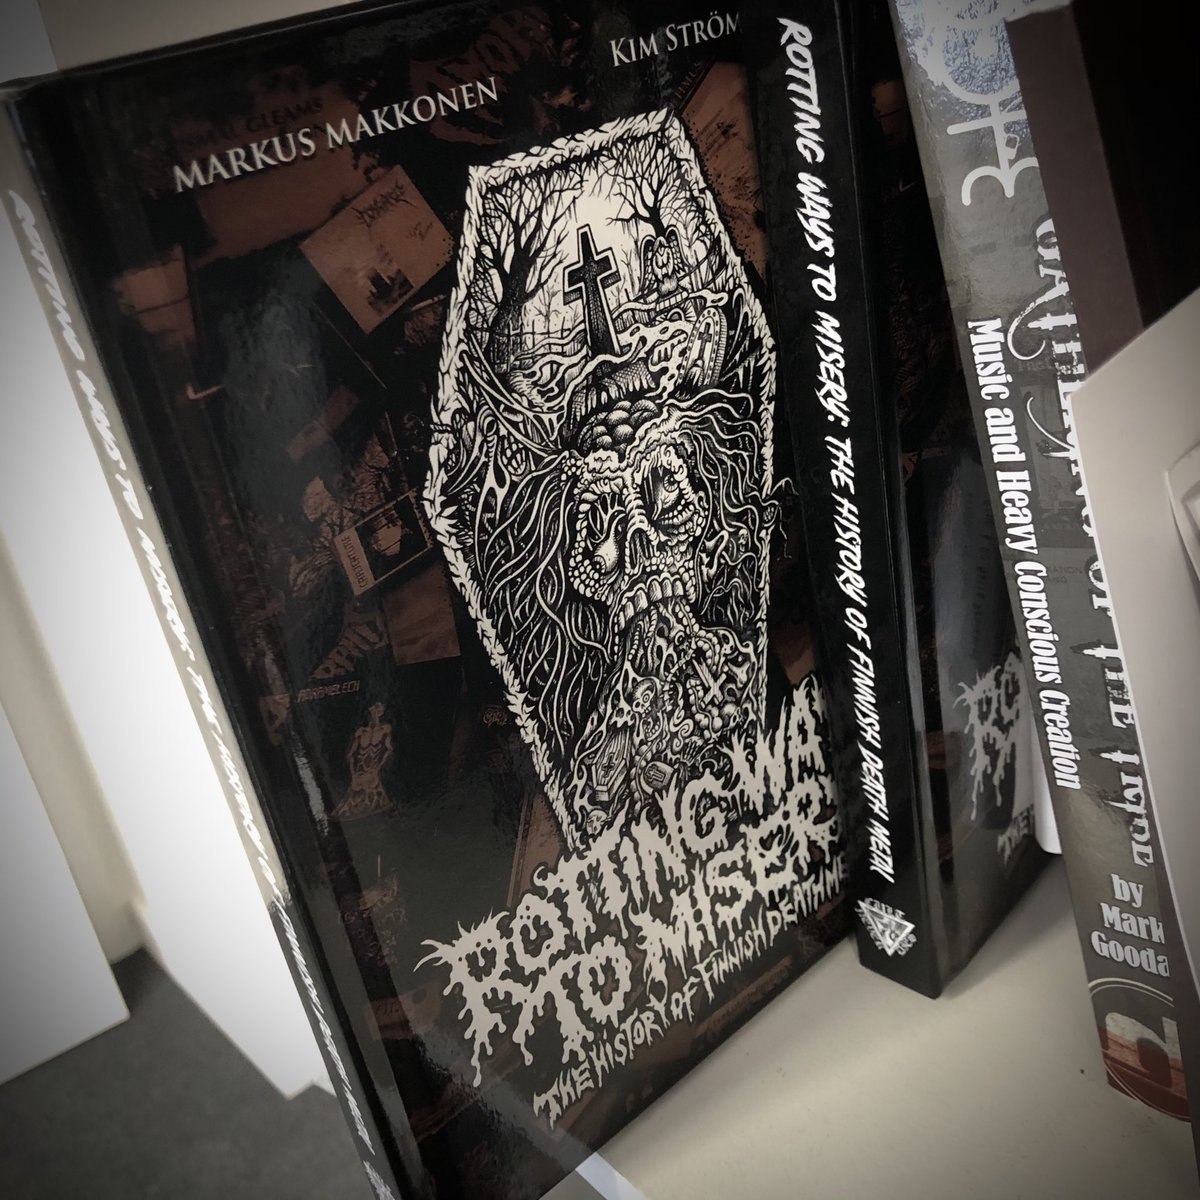 Back in print/stock: one of our best selling titles, ROTTING WAYS TO MISERY: THE HISTORY OF FINNISH DEATH METAL.

Available at CultNeverDies.myshopify.com and all good book and metal stores.

#cultneverdies #rottingwaystomisery #rottingwaystomiserybook